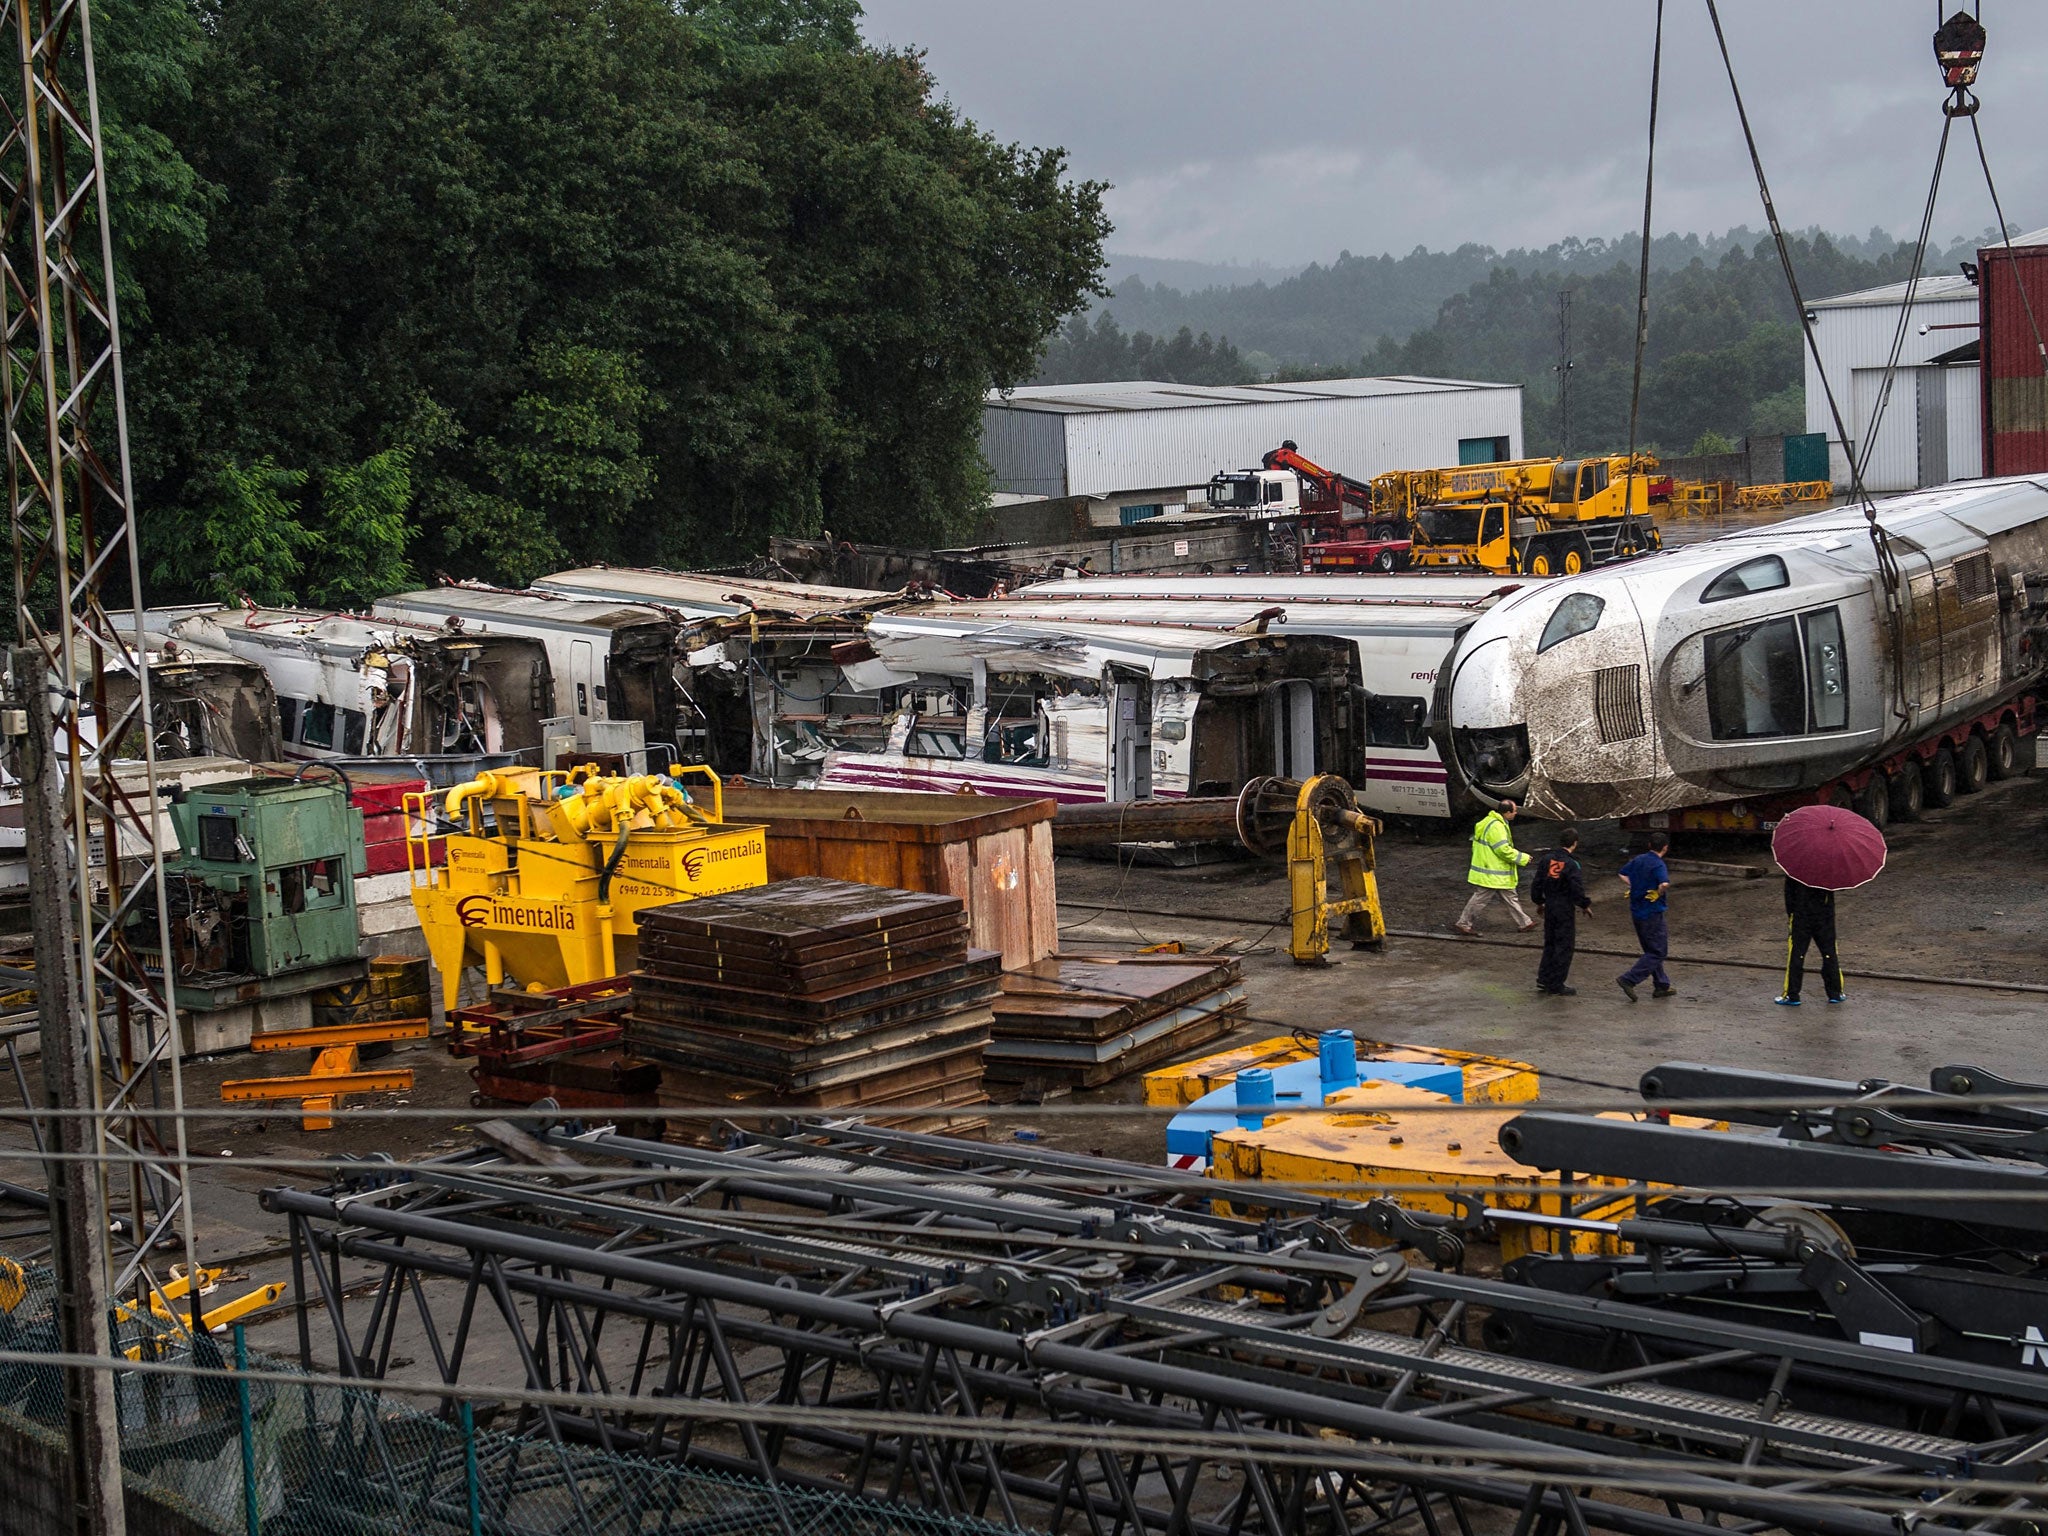 Wreckage from Wednesday’s train crash has been taken away for investigators to examine